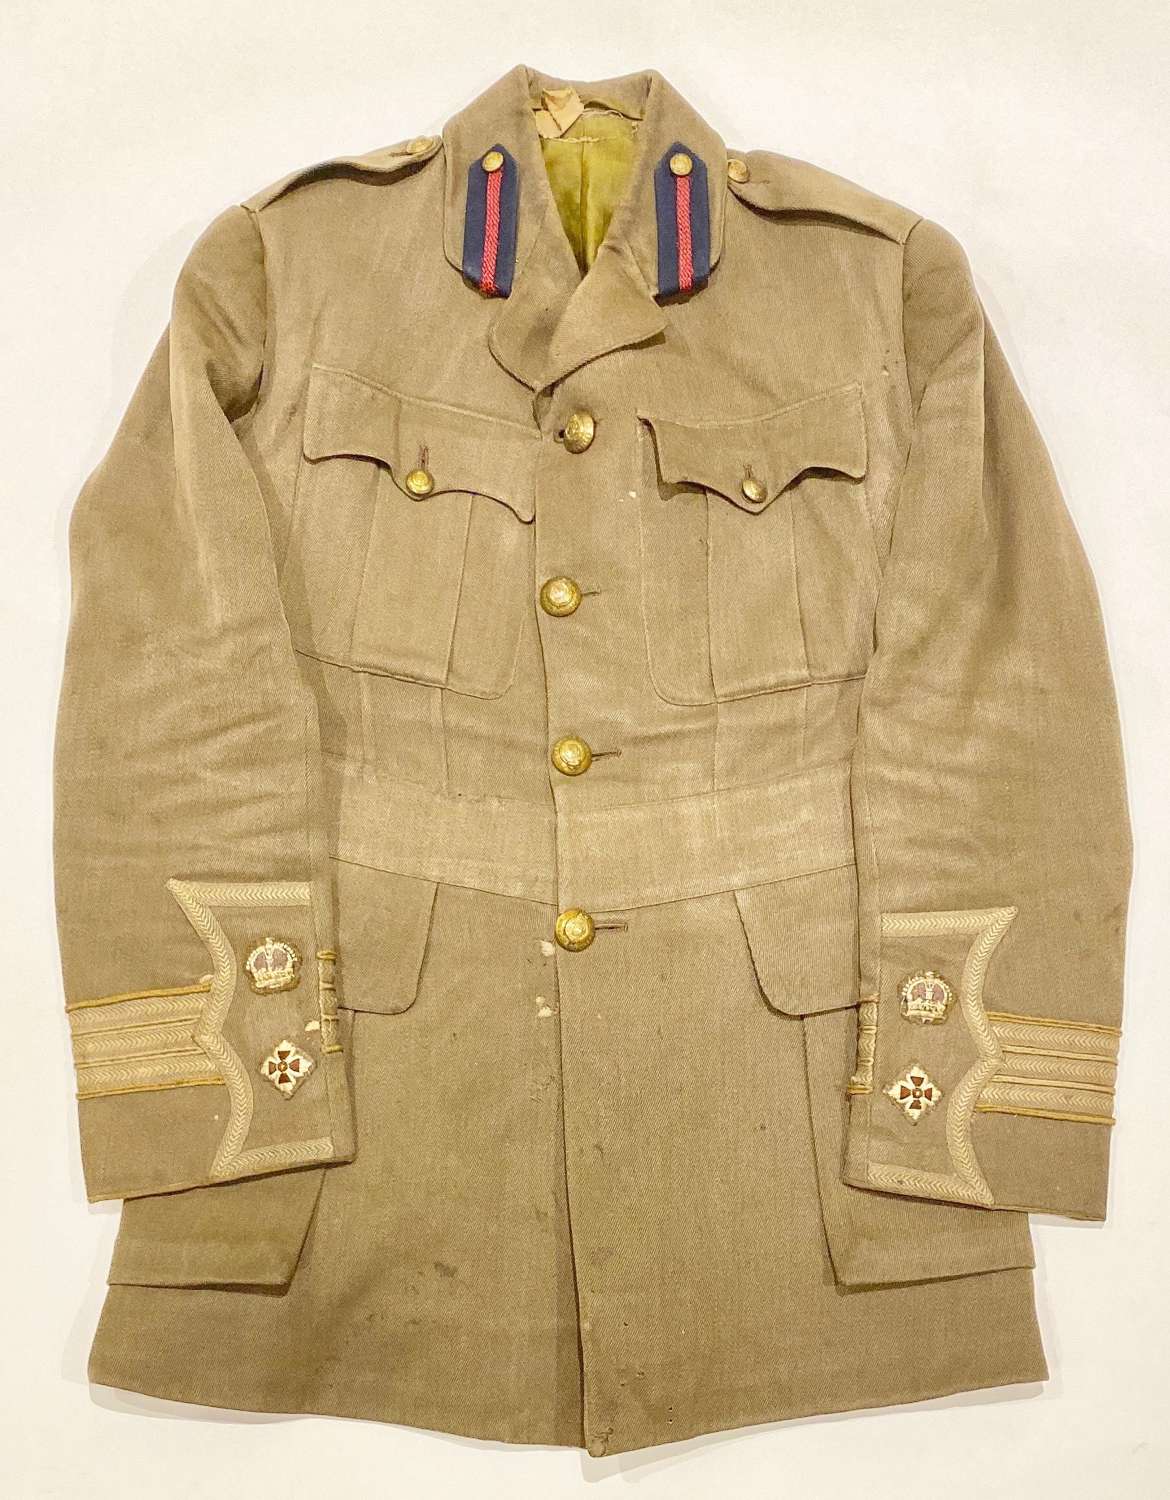 WW1 Royal Engineers Attributed Cuff Rank Officer’s Tunic.